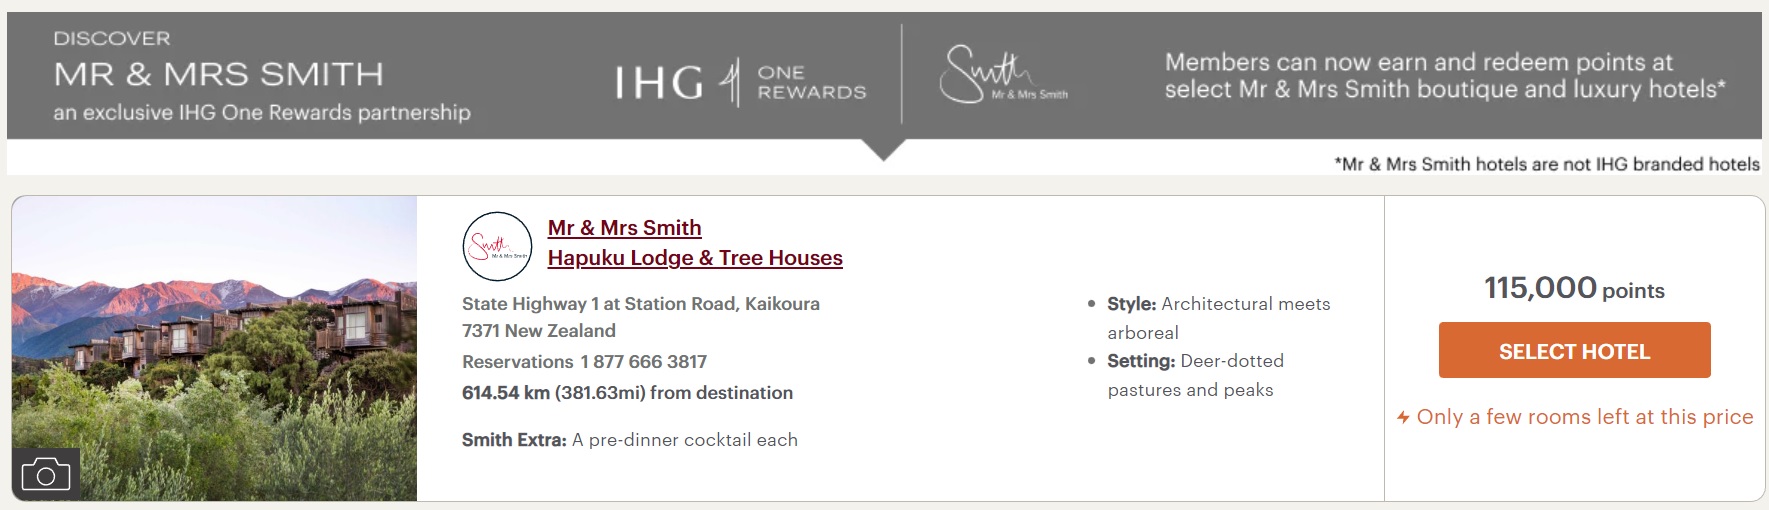 Hapuku Lodge & Treehouse a Mr & Mrs Smith property is shown here bookable for 115,000 IHG points per night